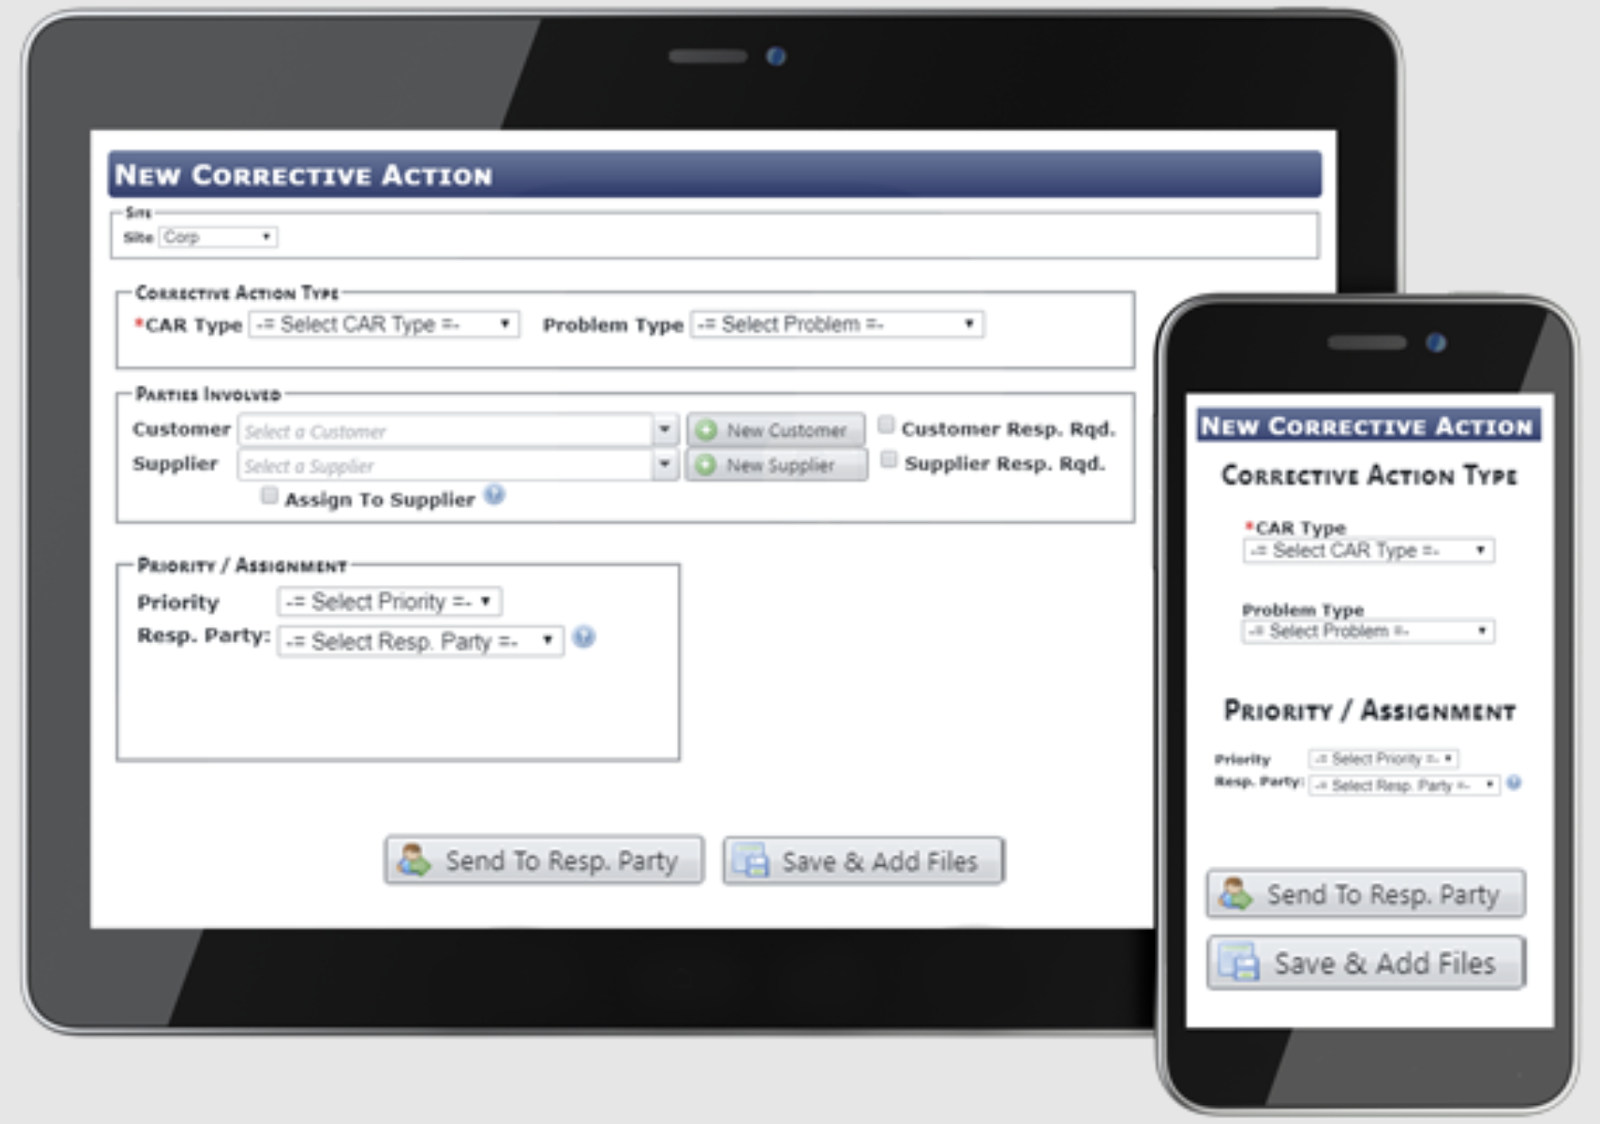 QT9 QMS maintenance management software user interface of new corrective action